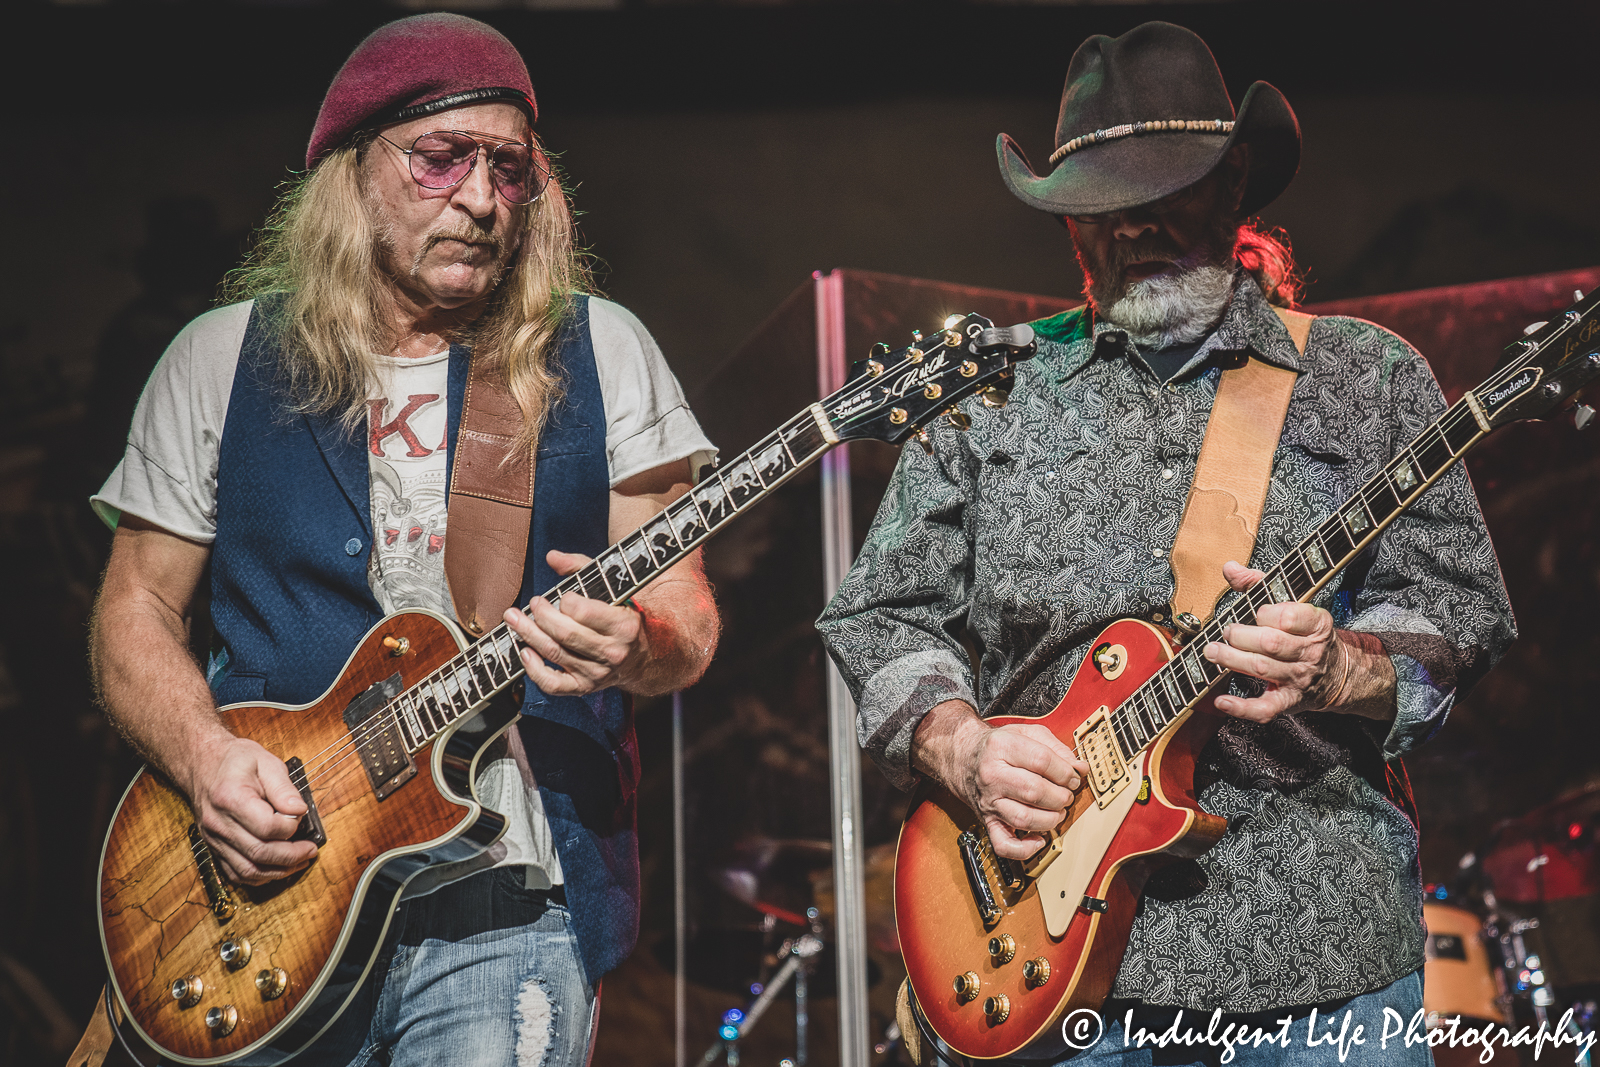 Guitarists Chris Hicks and Rick Willis of The Marshall Tucker Band performing together at Ameristar Casino in Kansas City, MO on October 28, 2022.